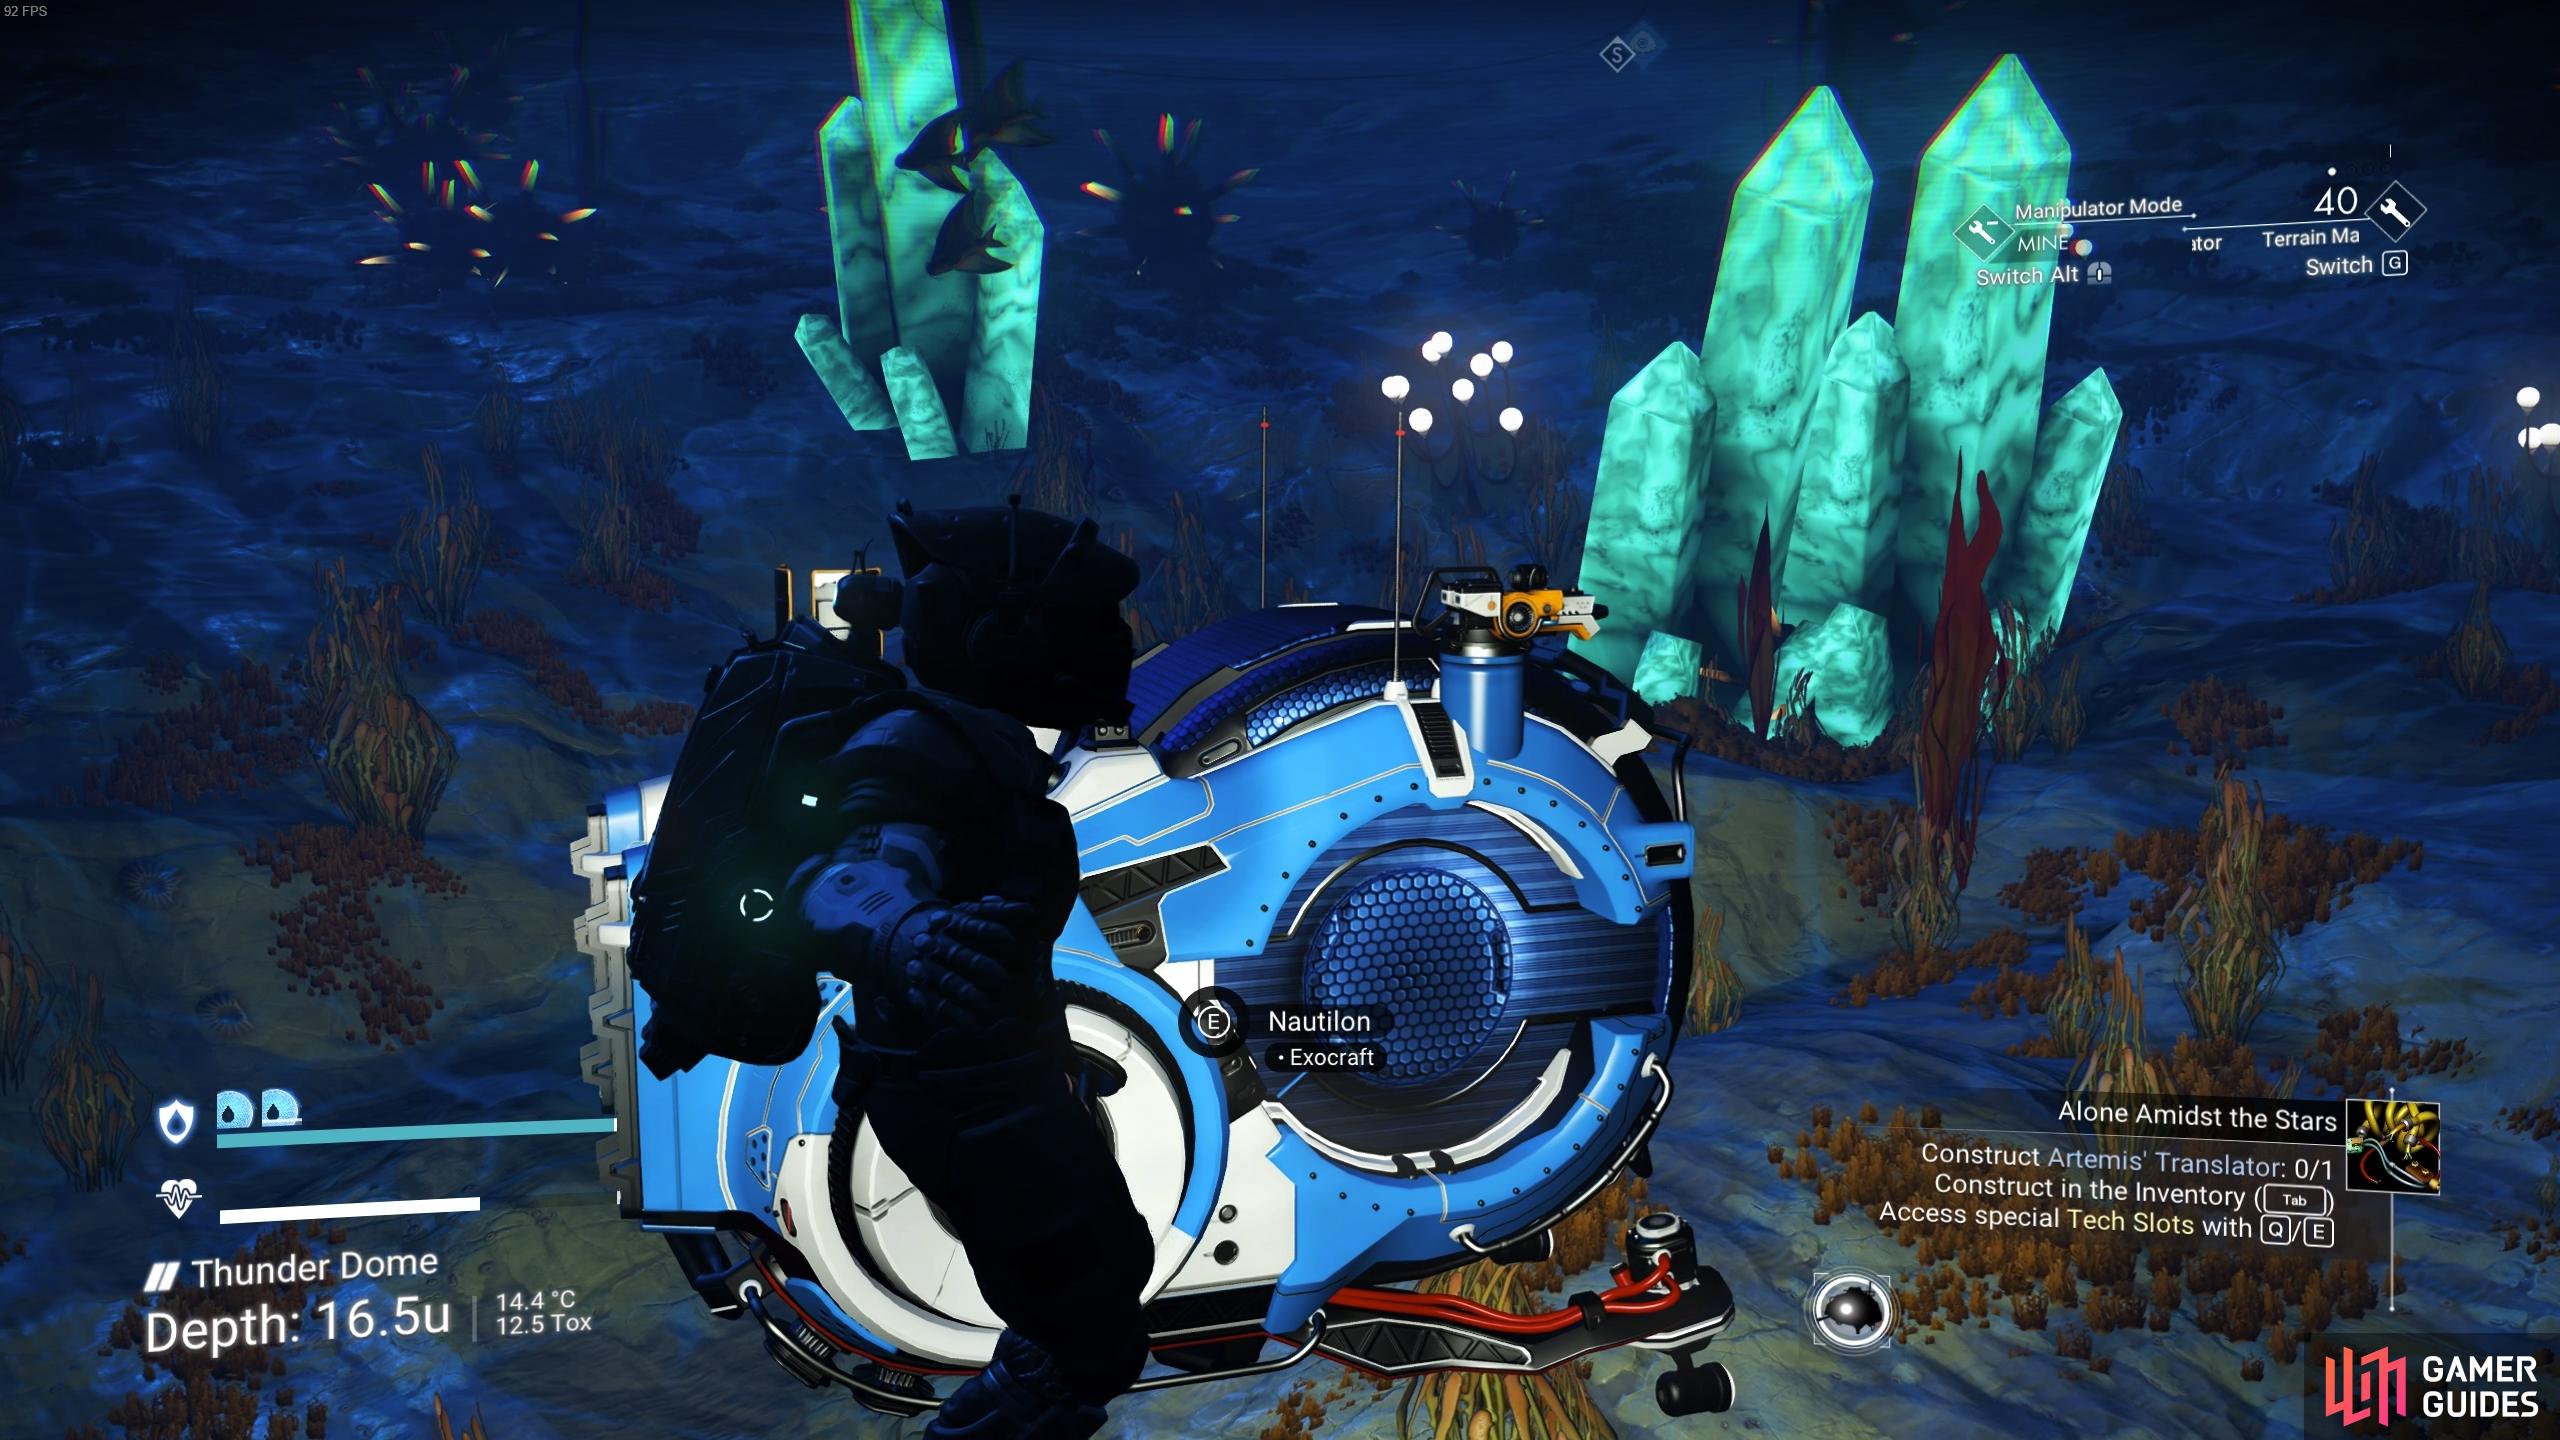 The Nautilon Exocraft will allow you to explore underwater much more efficiently.